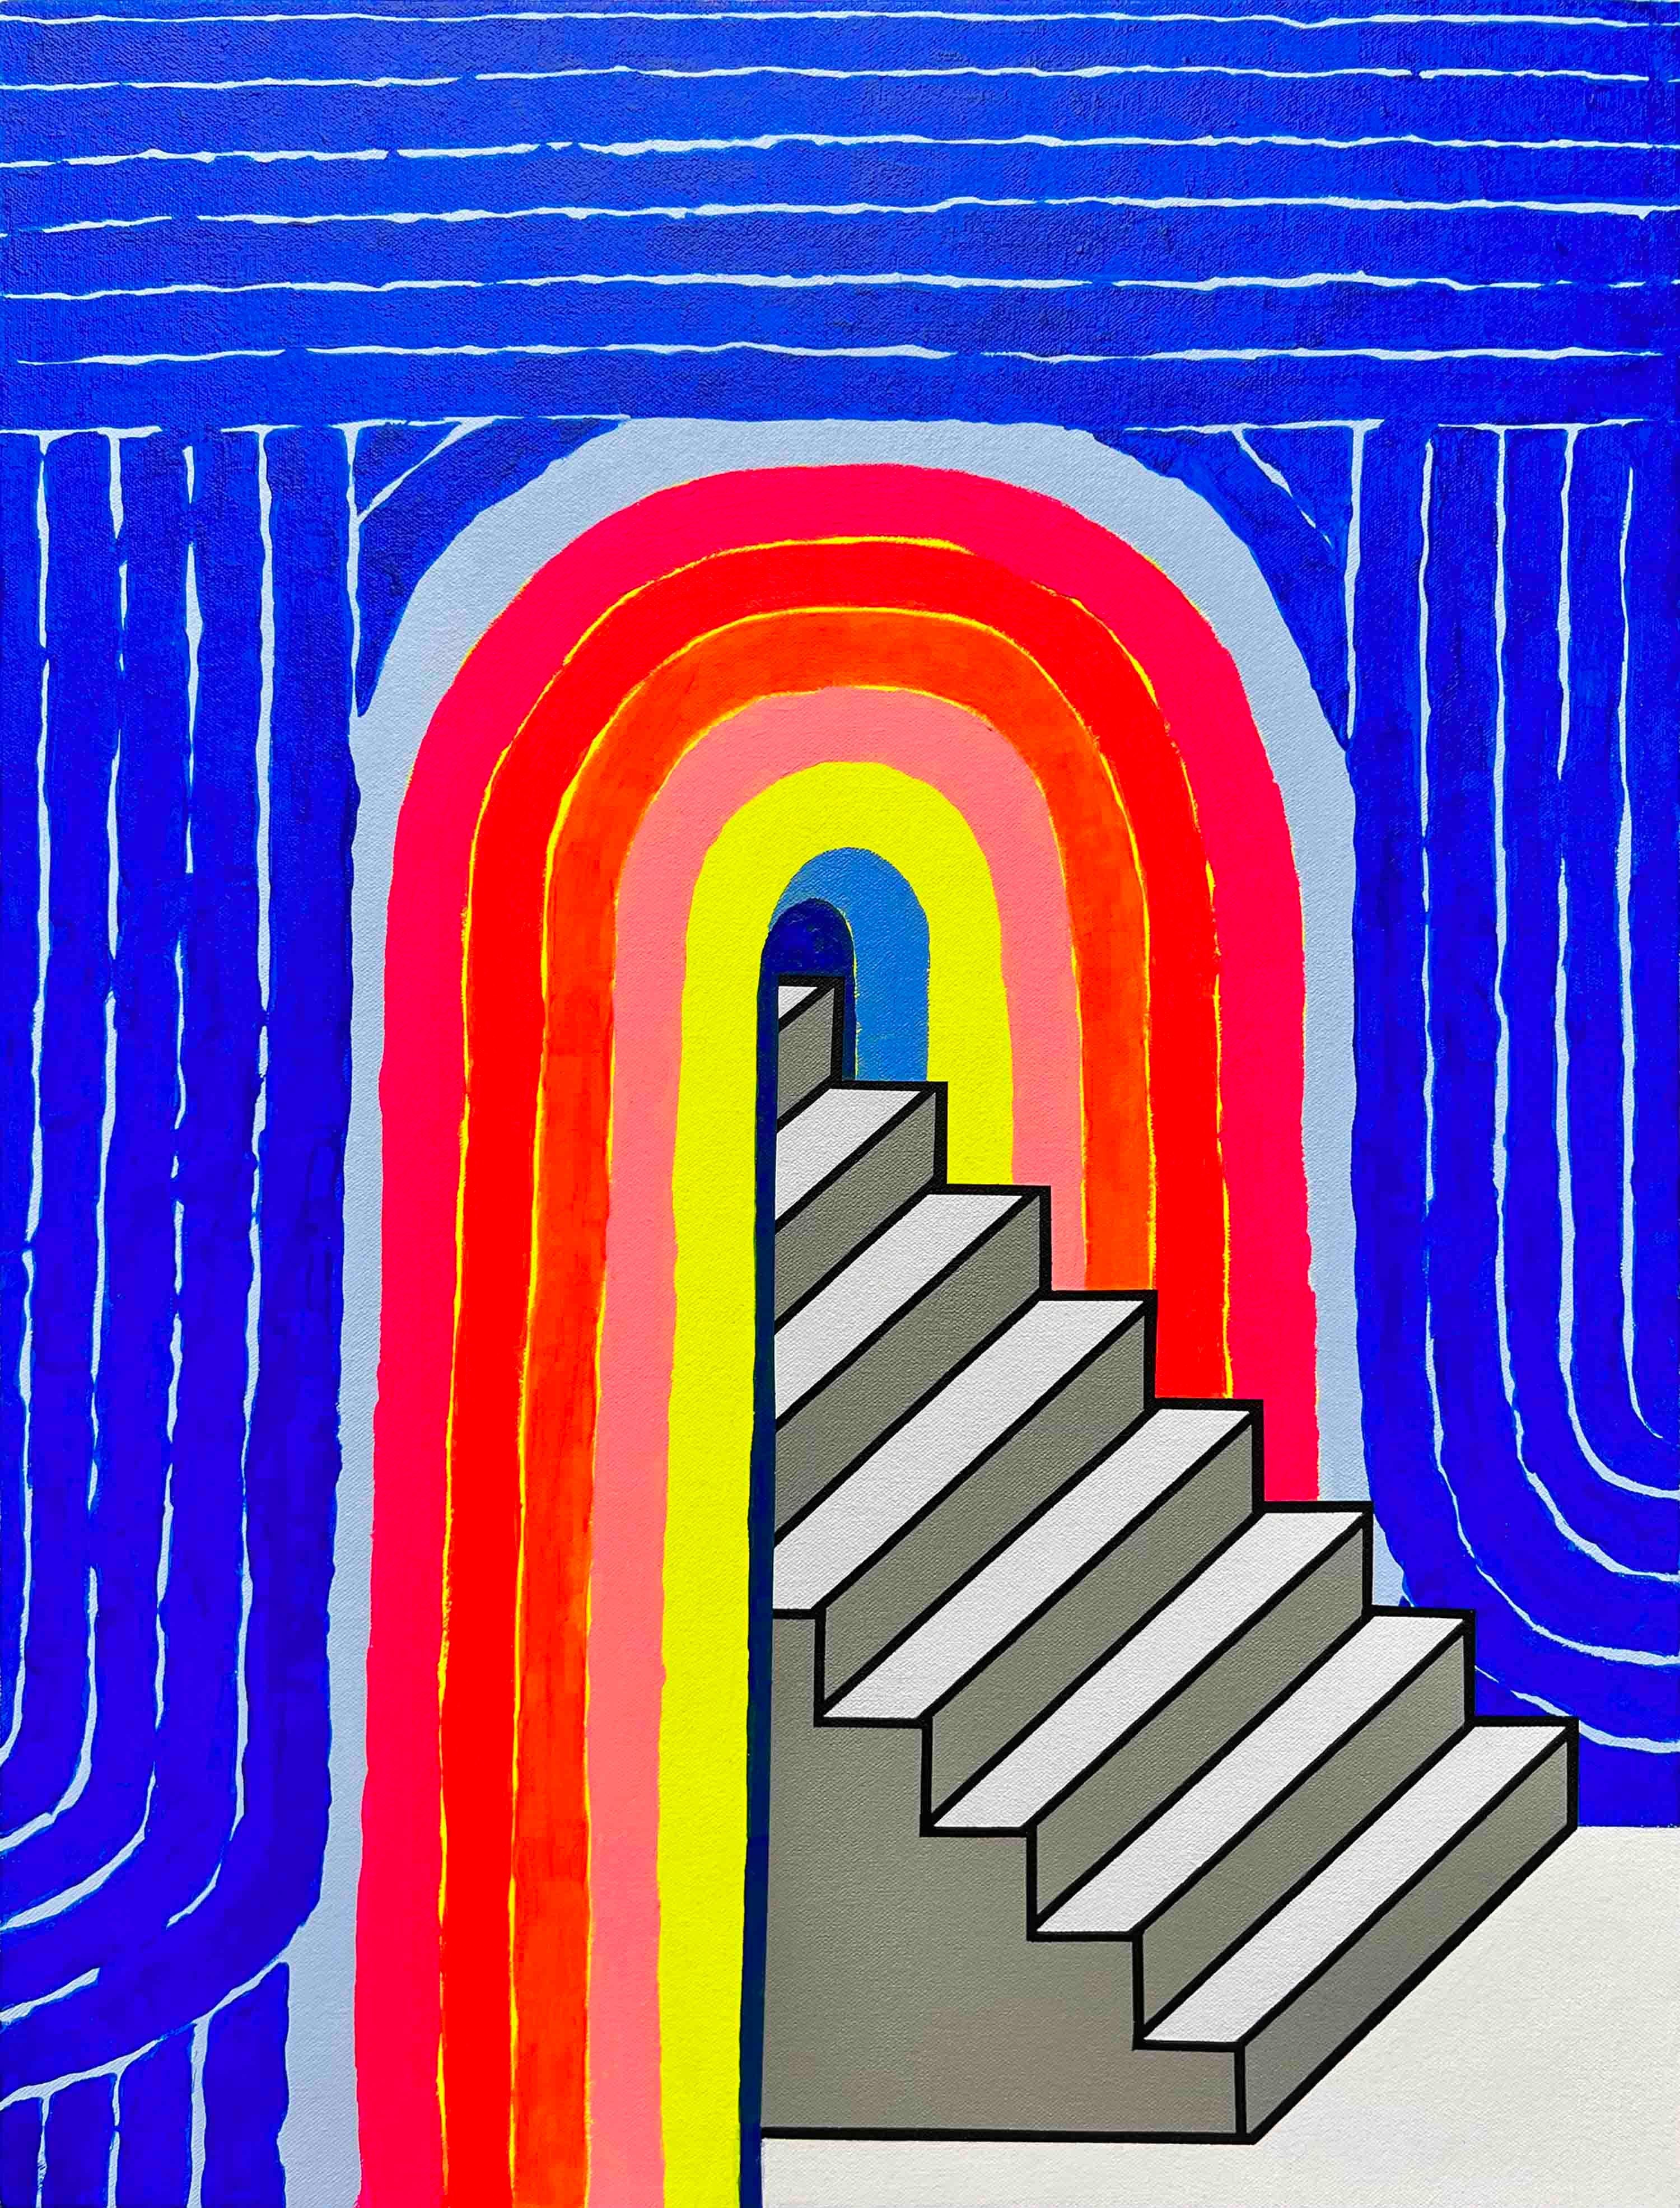 Chris Cascio Landscape Painting - "Untitled (After Kleberg)" Contemporary Abstract Rainbow Staircase Landscape